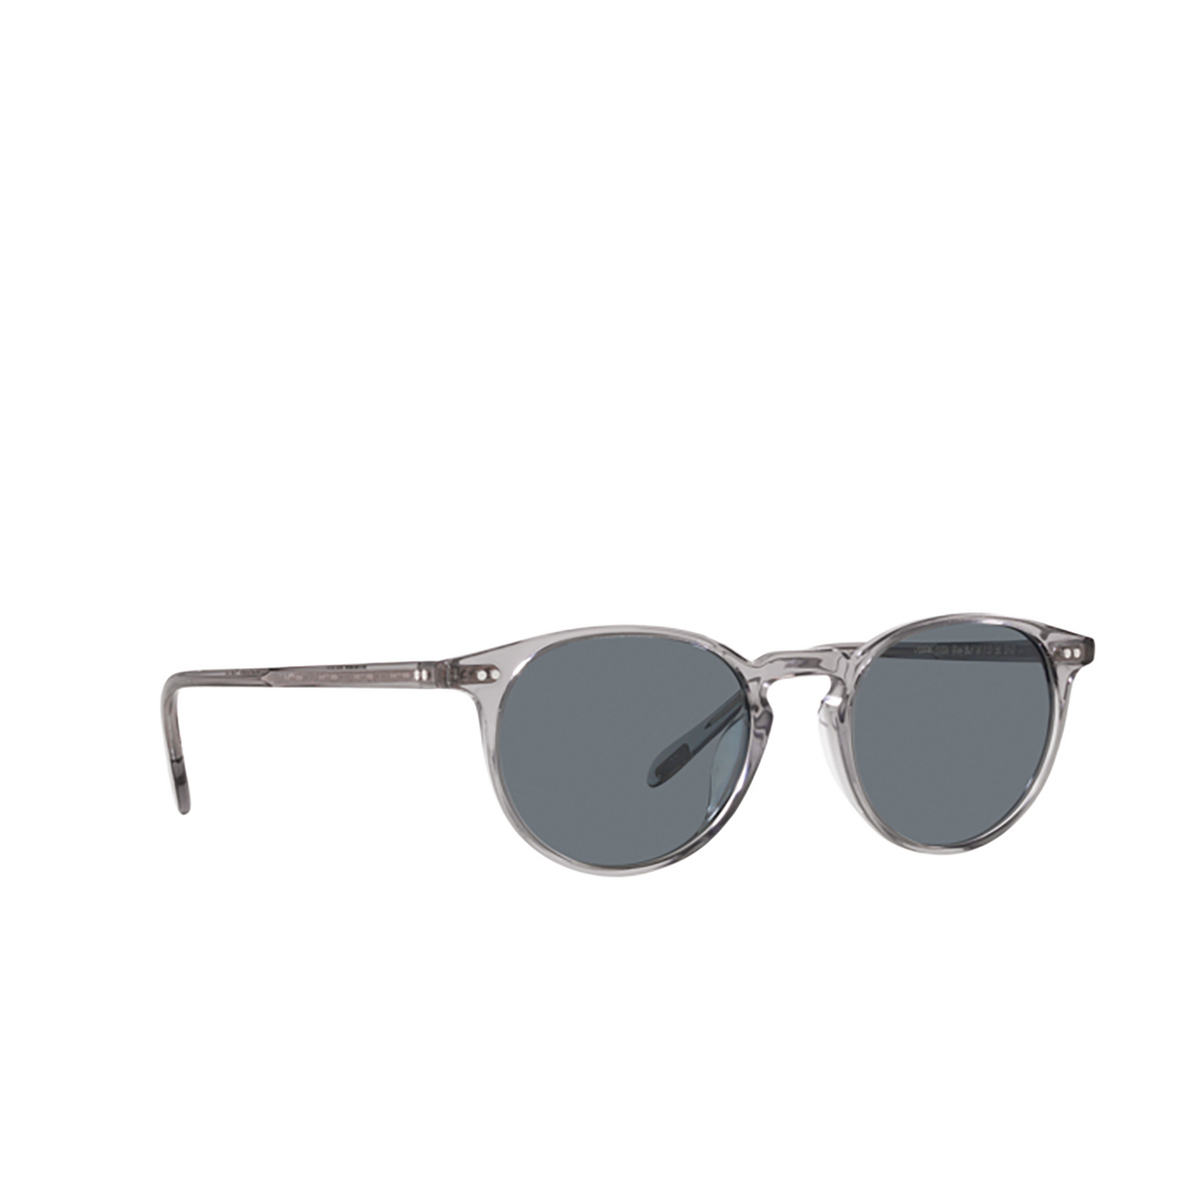 Oliver Peoples RILEY Sunglasses 1132R8 Workman Grey - three-quarters view